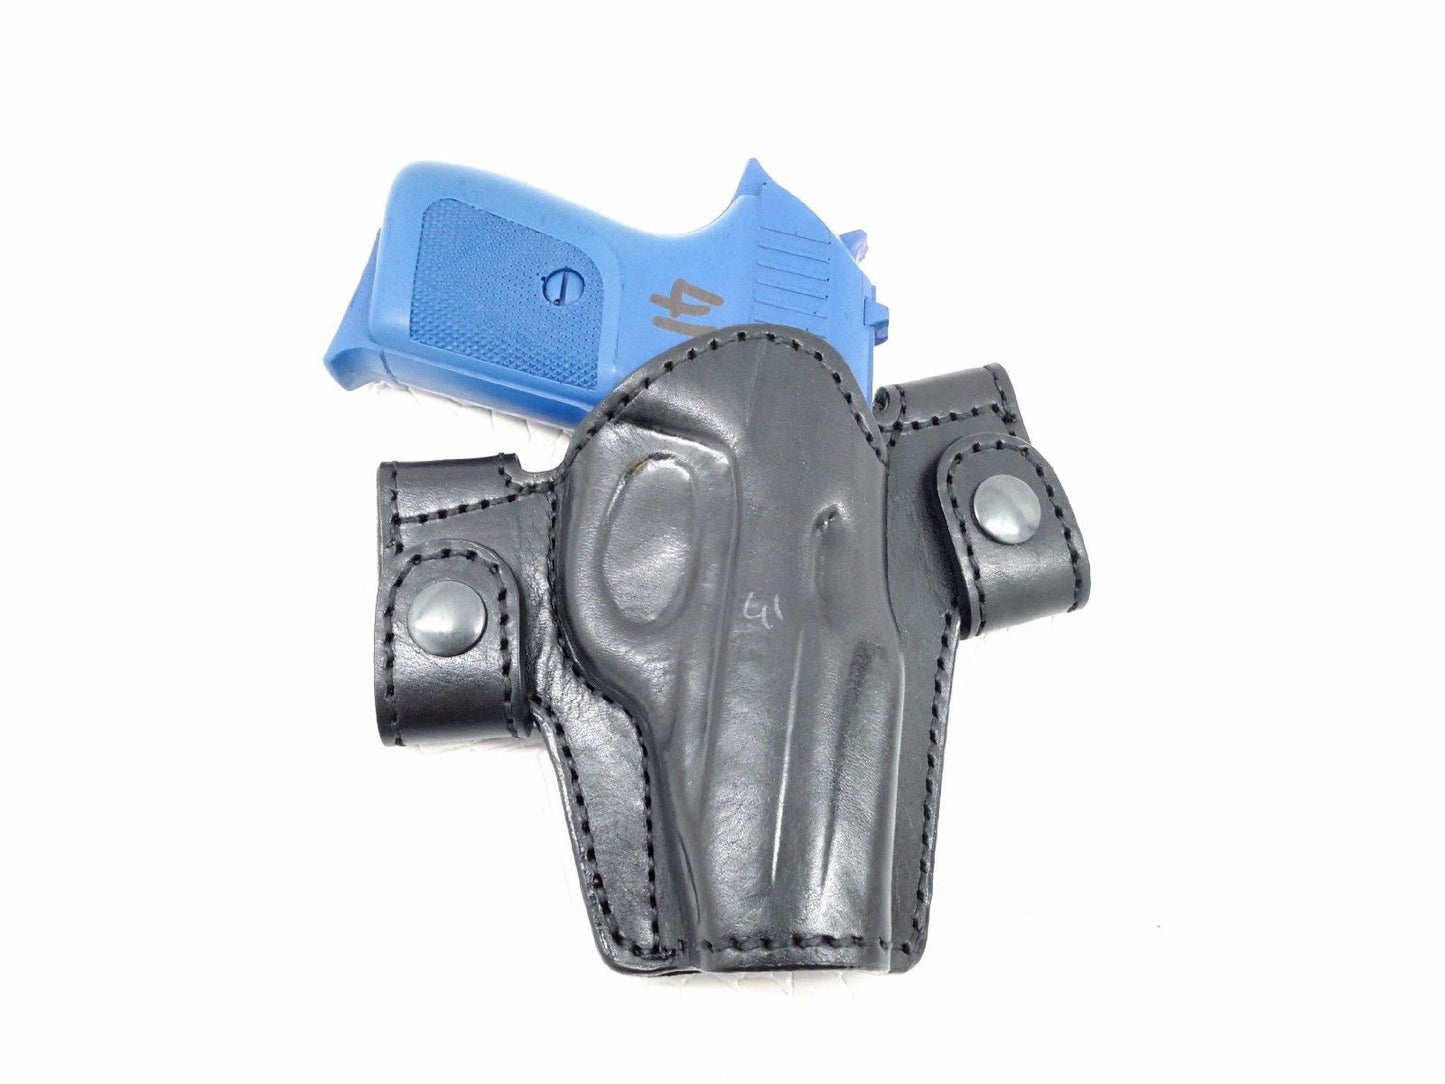 Snap-on Holster for SIG Sauer P230, MyHolster